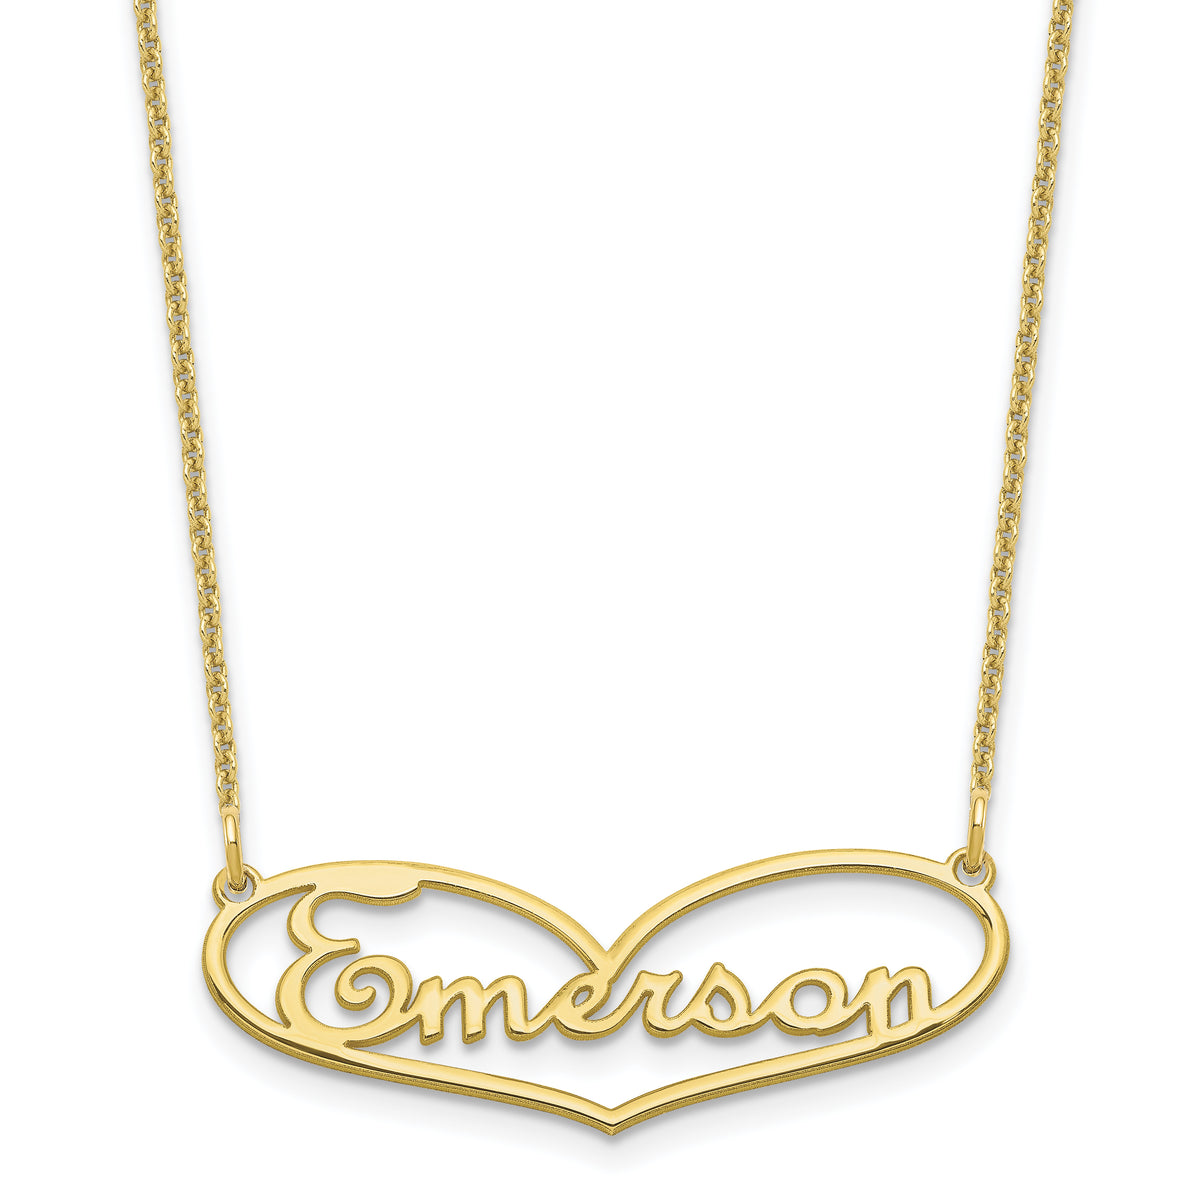 Heart Nameplate Personalized Necklace w/ 18 inch Necklace - Small Size 1.25 inches wide (Up to 10 Characters)